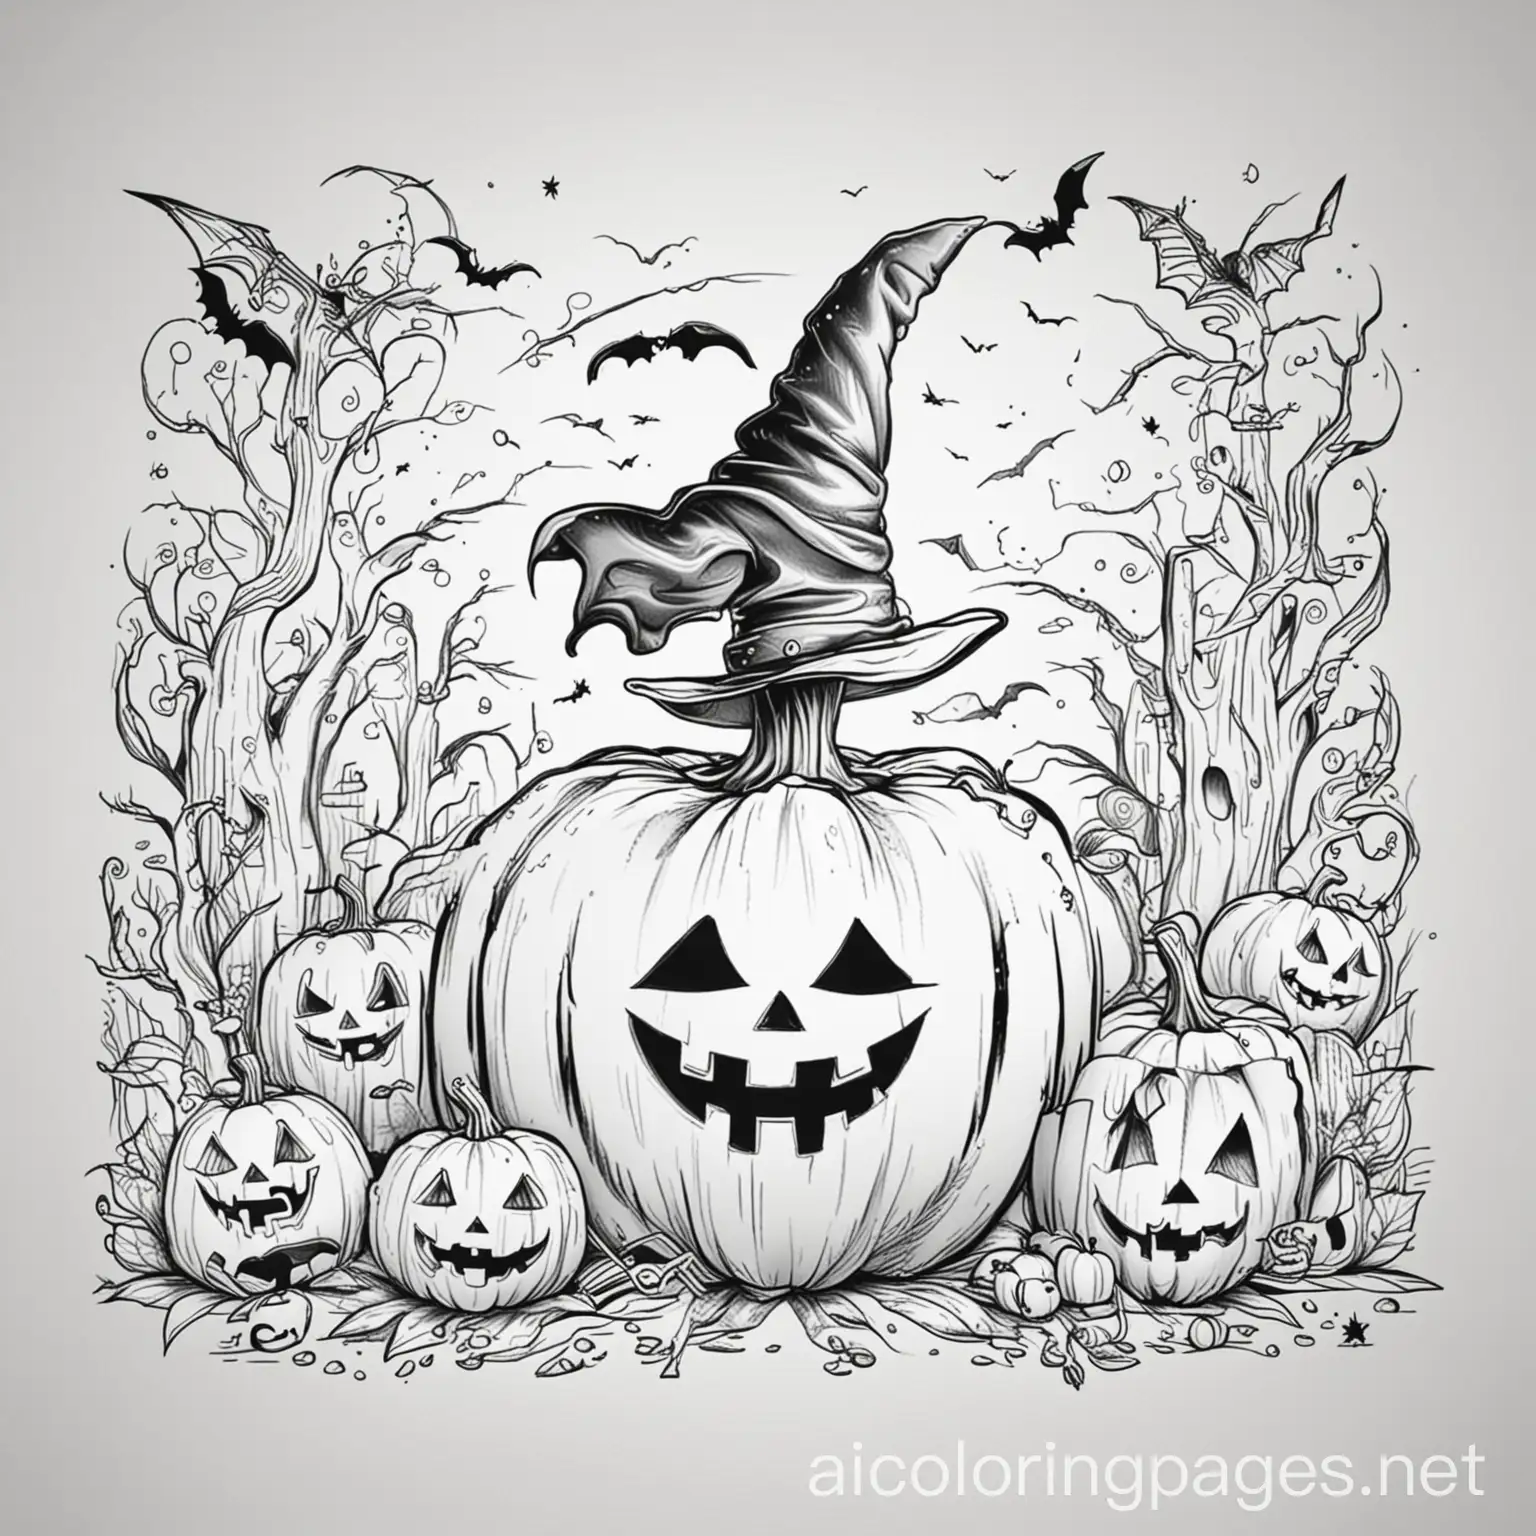 happy halloween black and white coloring pages, Coloring Page, black and white, line art, white background, Simplicity, Ample White Space